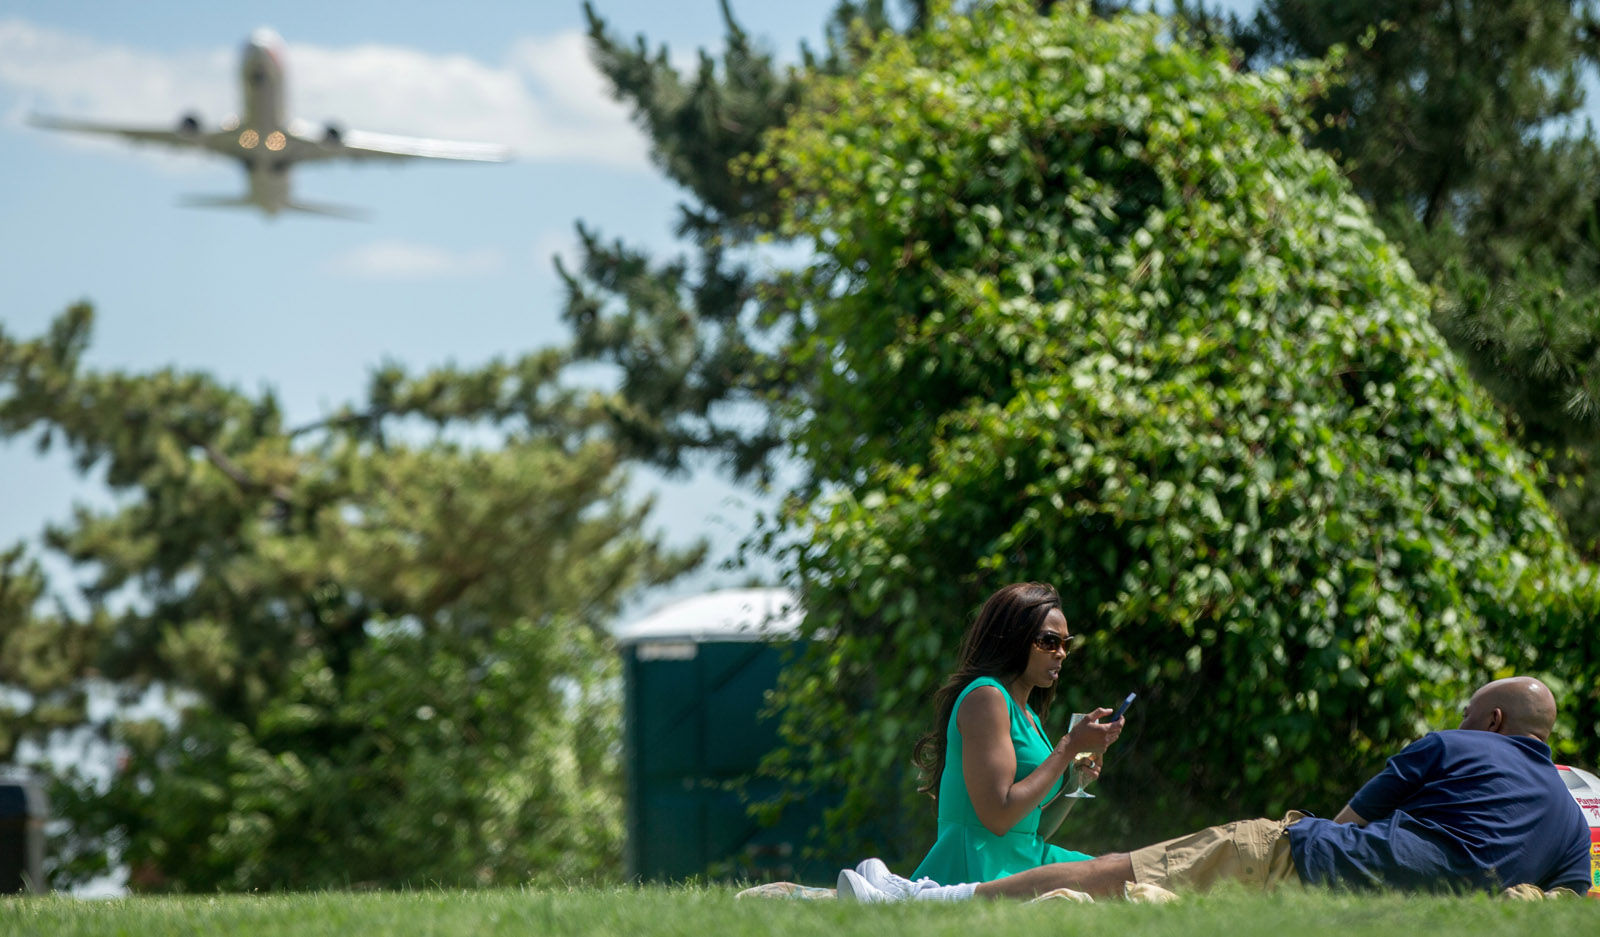 A plane takes off from Washington's Ronald Reagan National Airport as Marcel Clark of Washington, right, and Rosemary Loza of Rockville, Md. picnic at Gravelly Point Park in Arlington, Va., Wednesday, June 8, 2016. (AP Photo/Andrew Harnik)